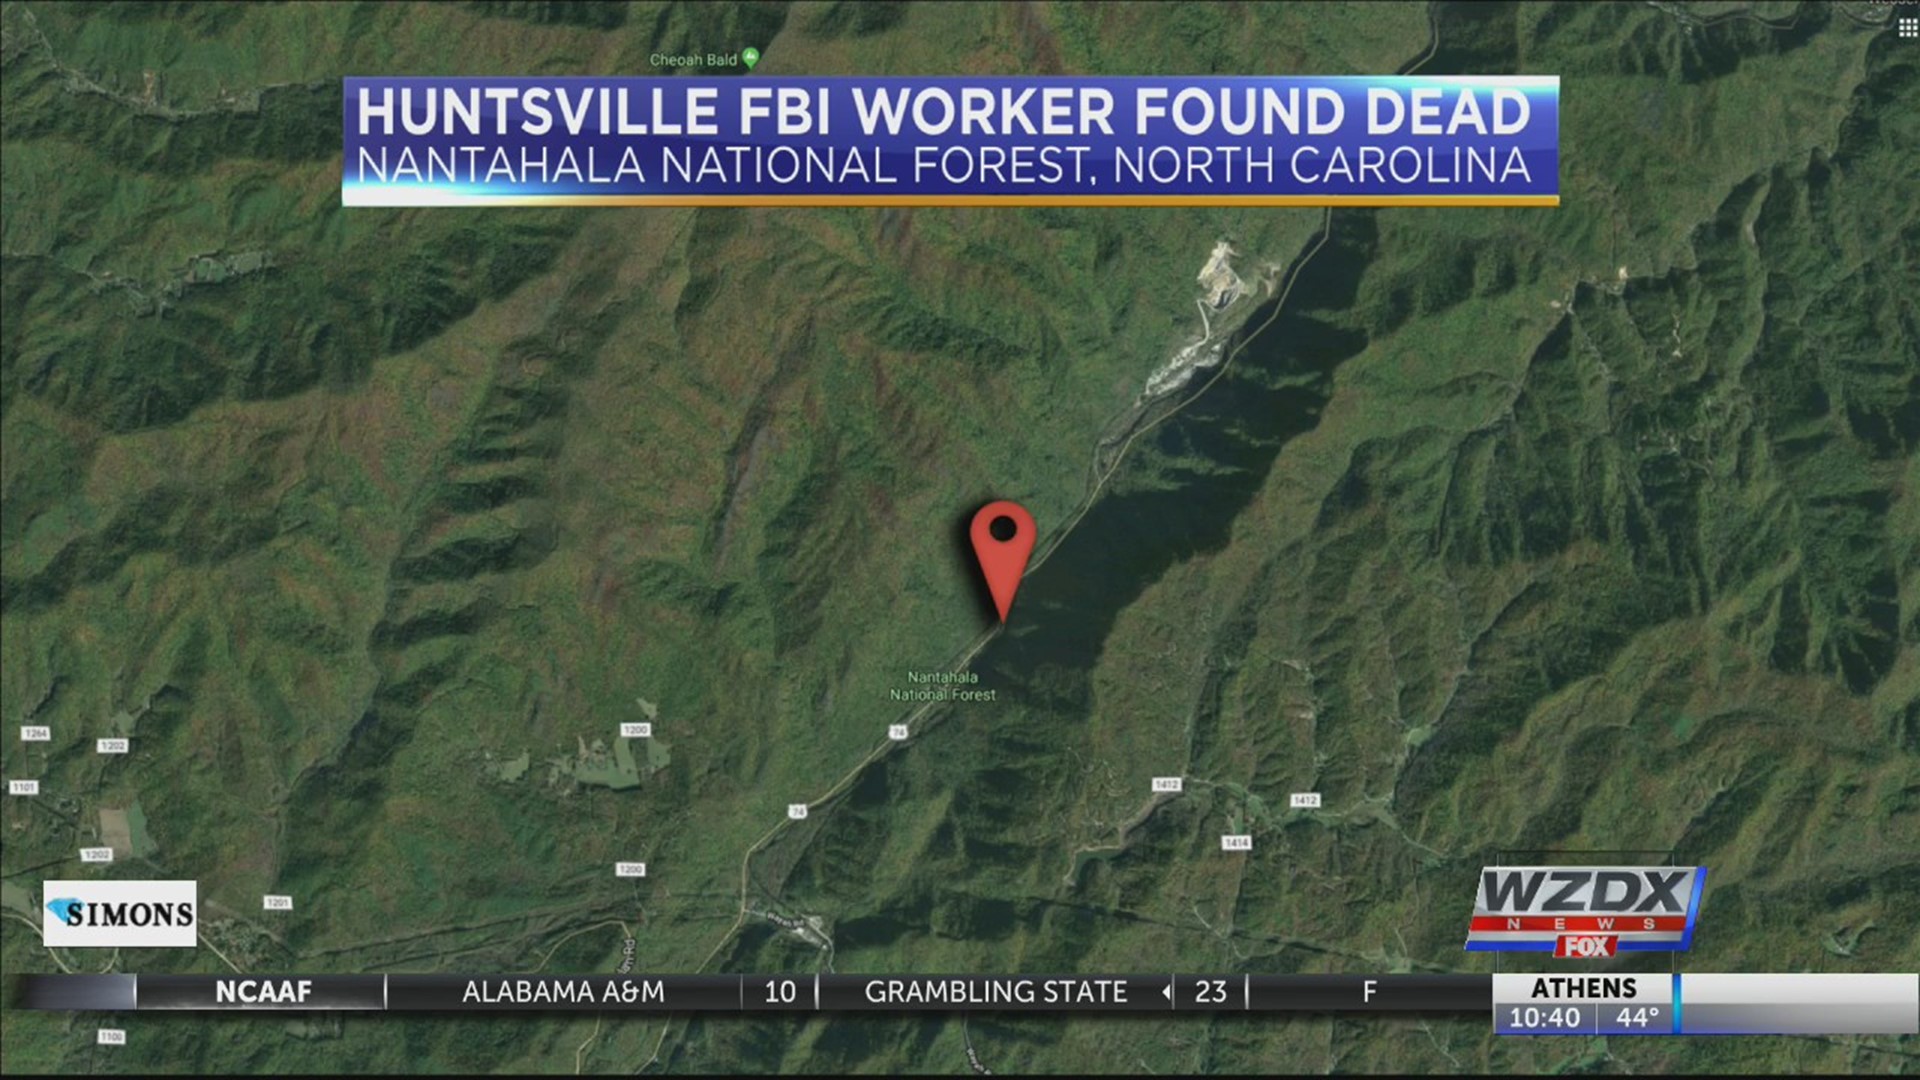 A Huntsville FBI worker has been found dead in North Carolina, according to the Graham County Sheriff's Office there.